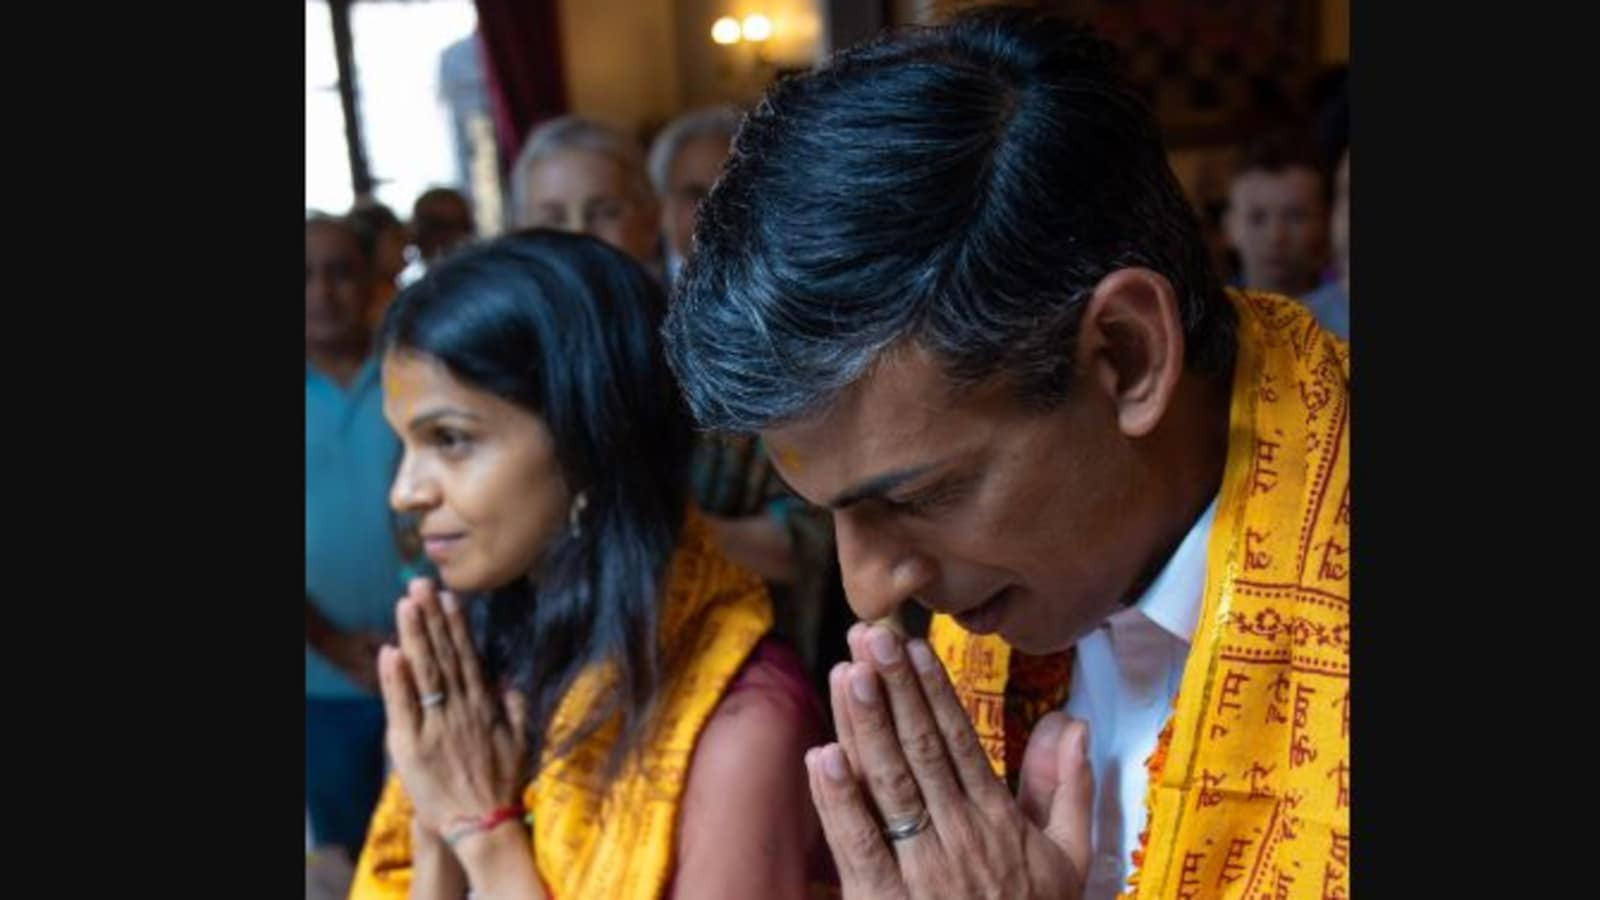 Britain's PM Candidate Rishi Sunak visits Temple with wife